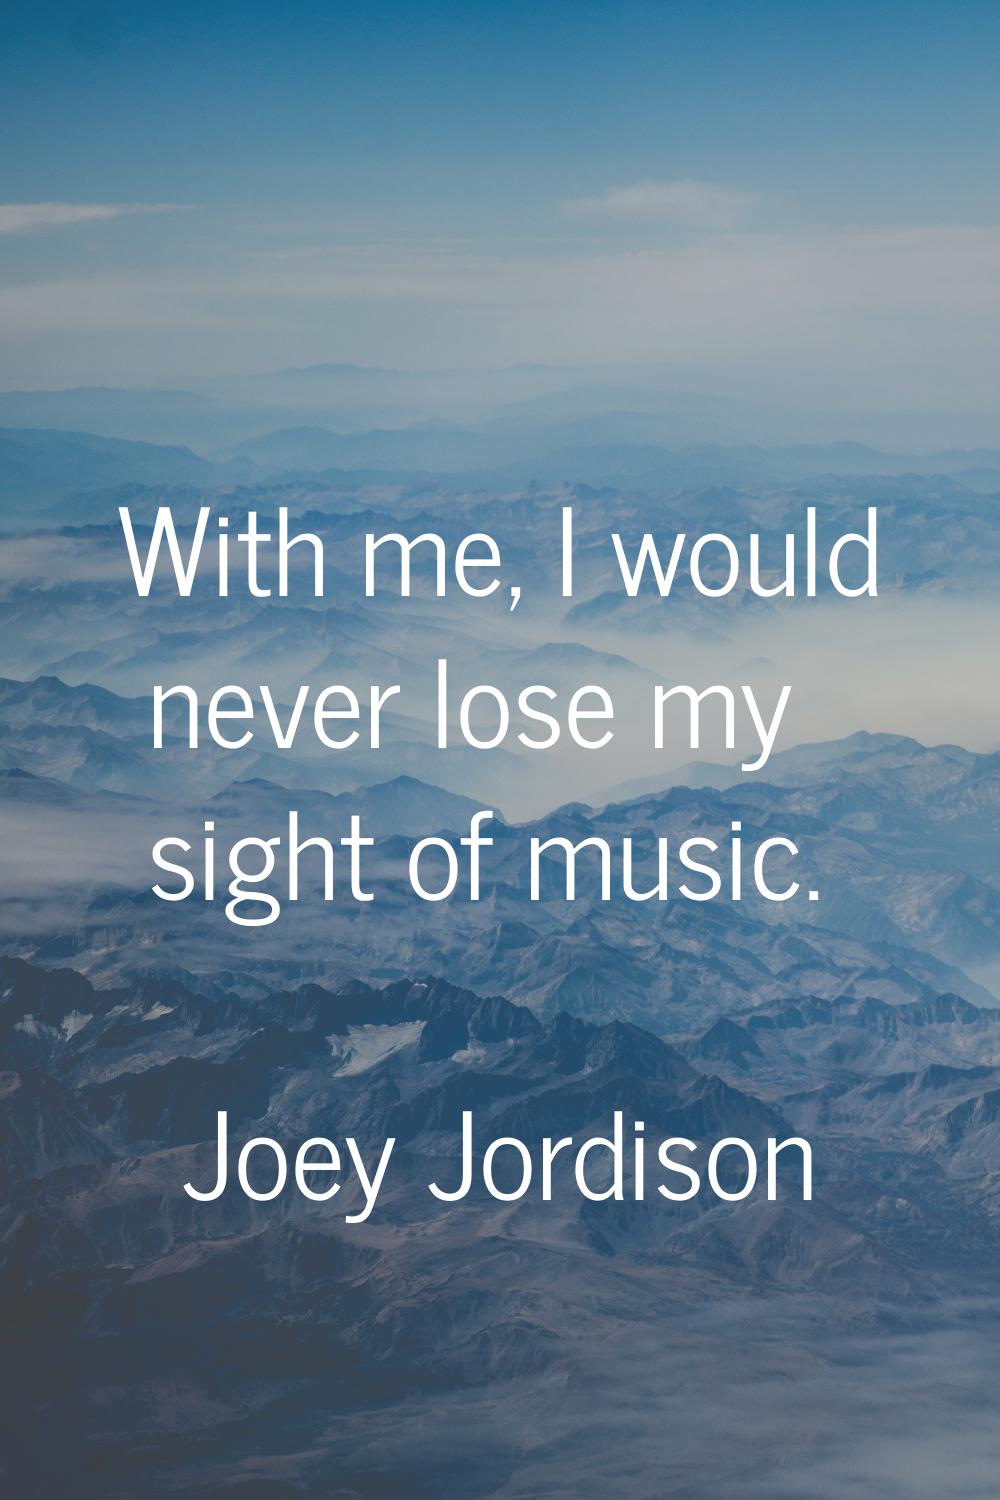 With me, I would never lose my sight of music.